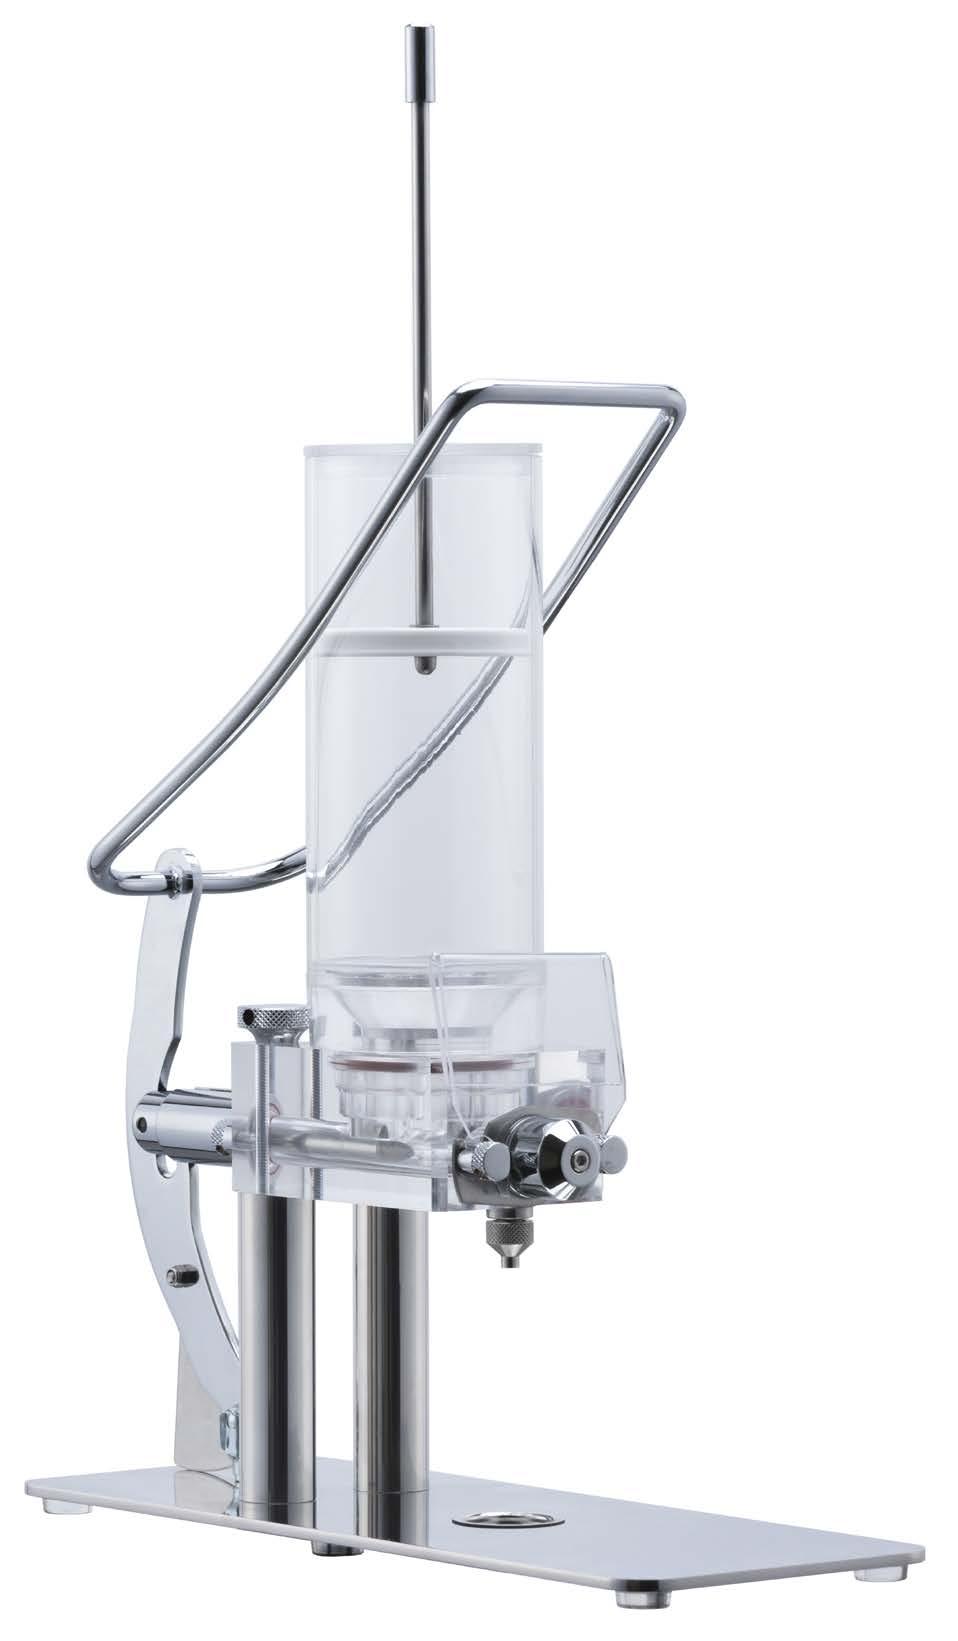 Buffet STOCK with standard nozzle, the ideal to put